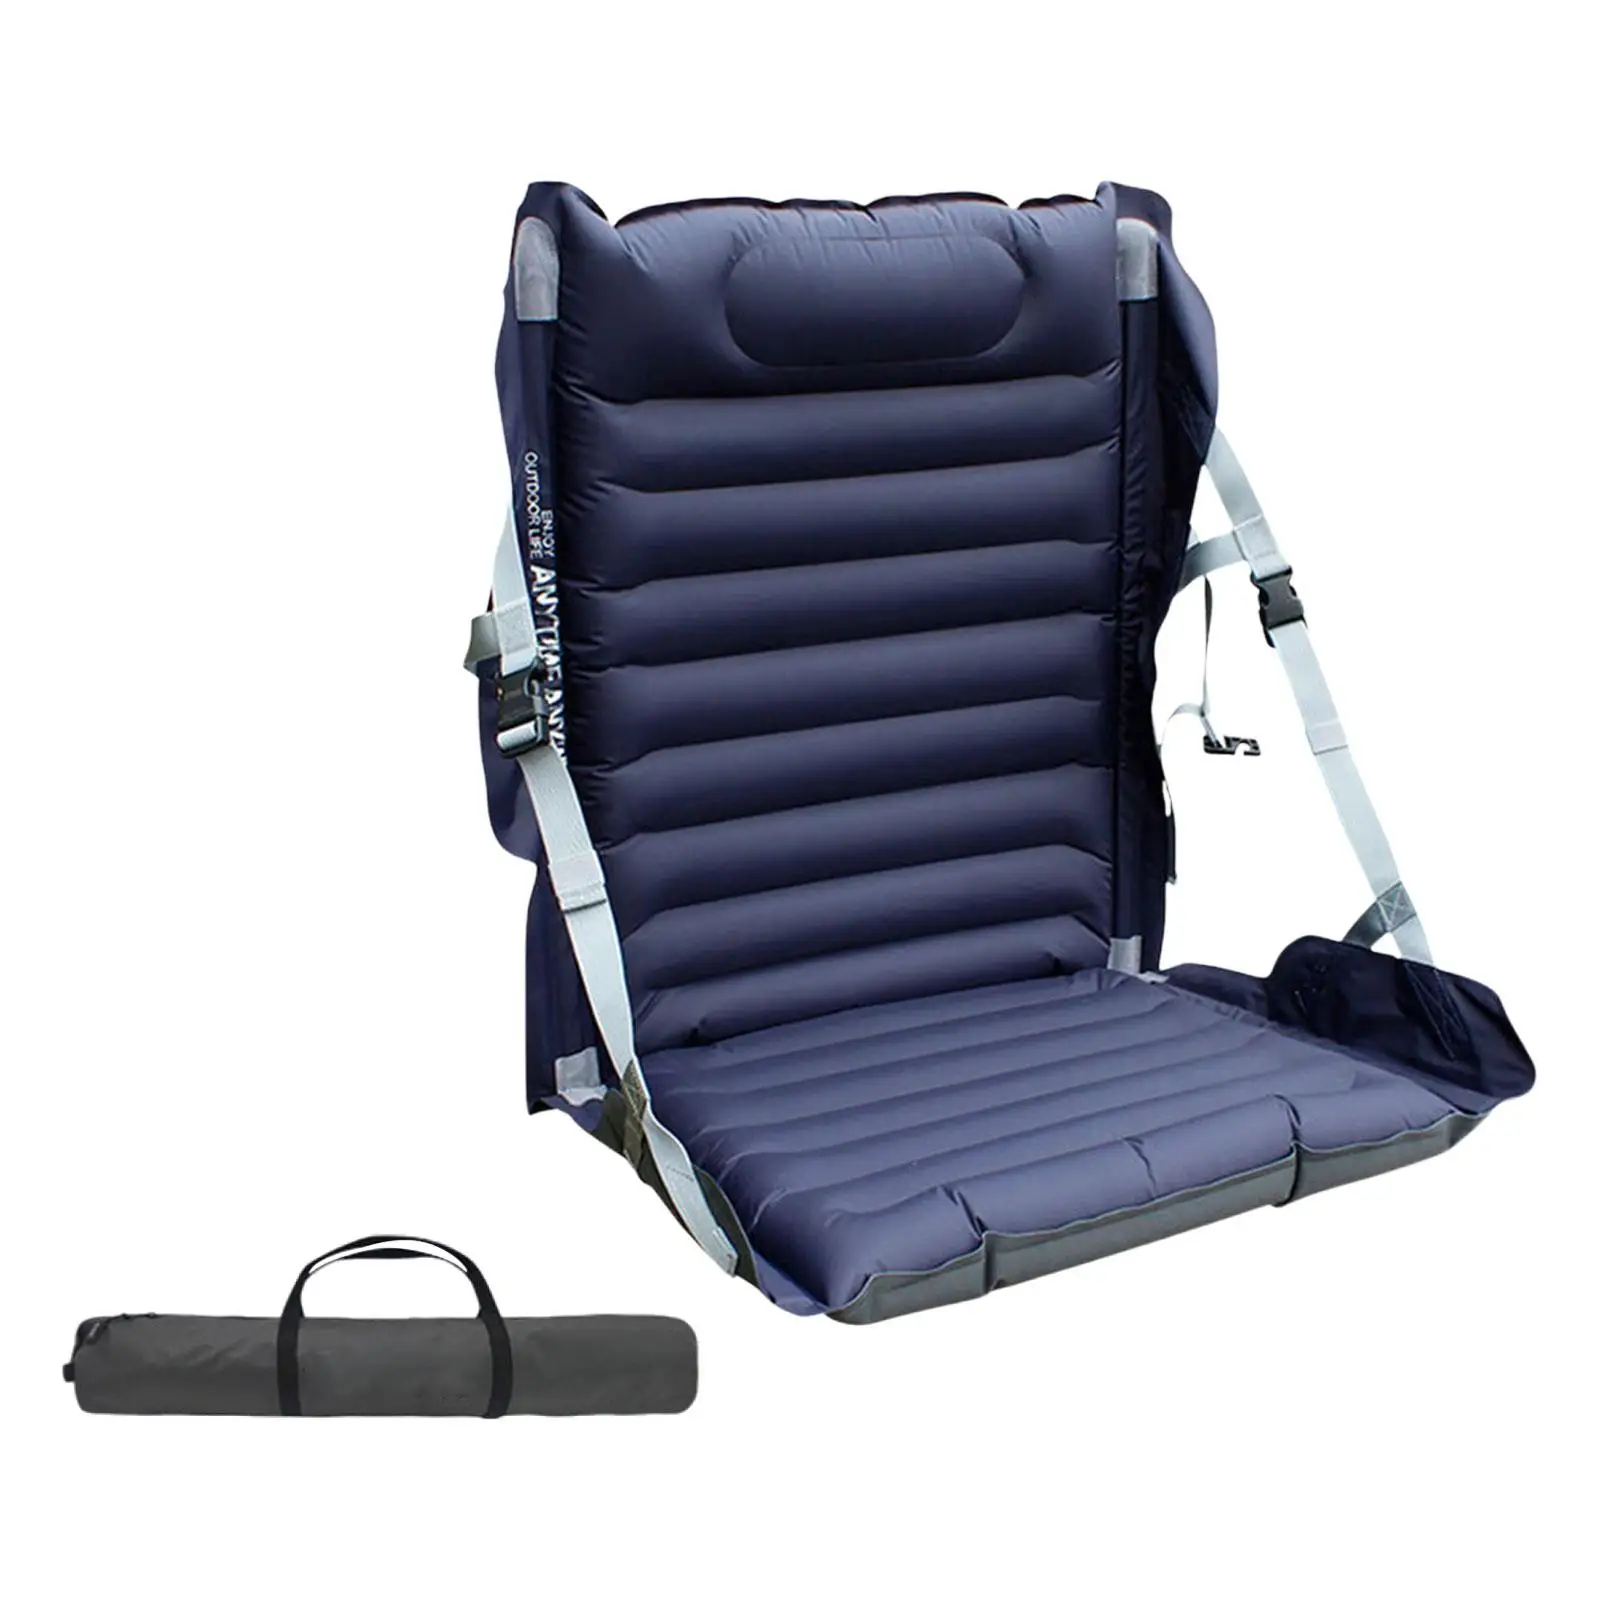 Floor Chair with Back Support Inflatable Waterproof for Fishing Beach Picnic